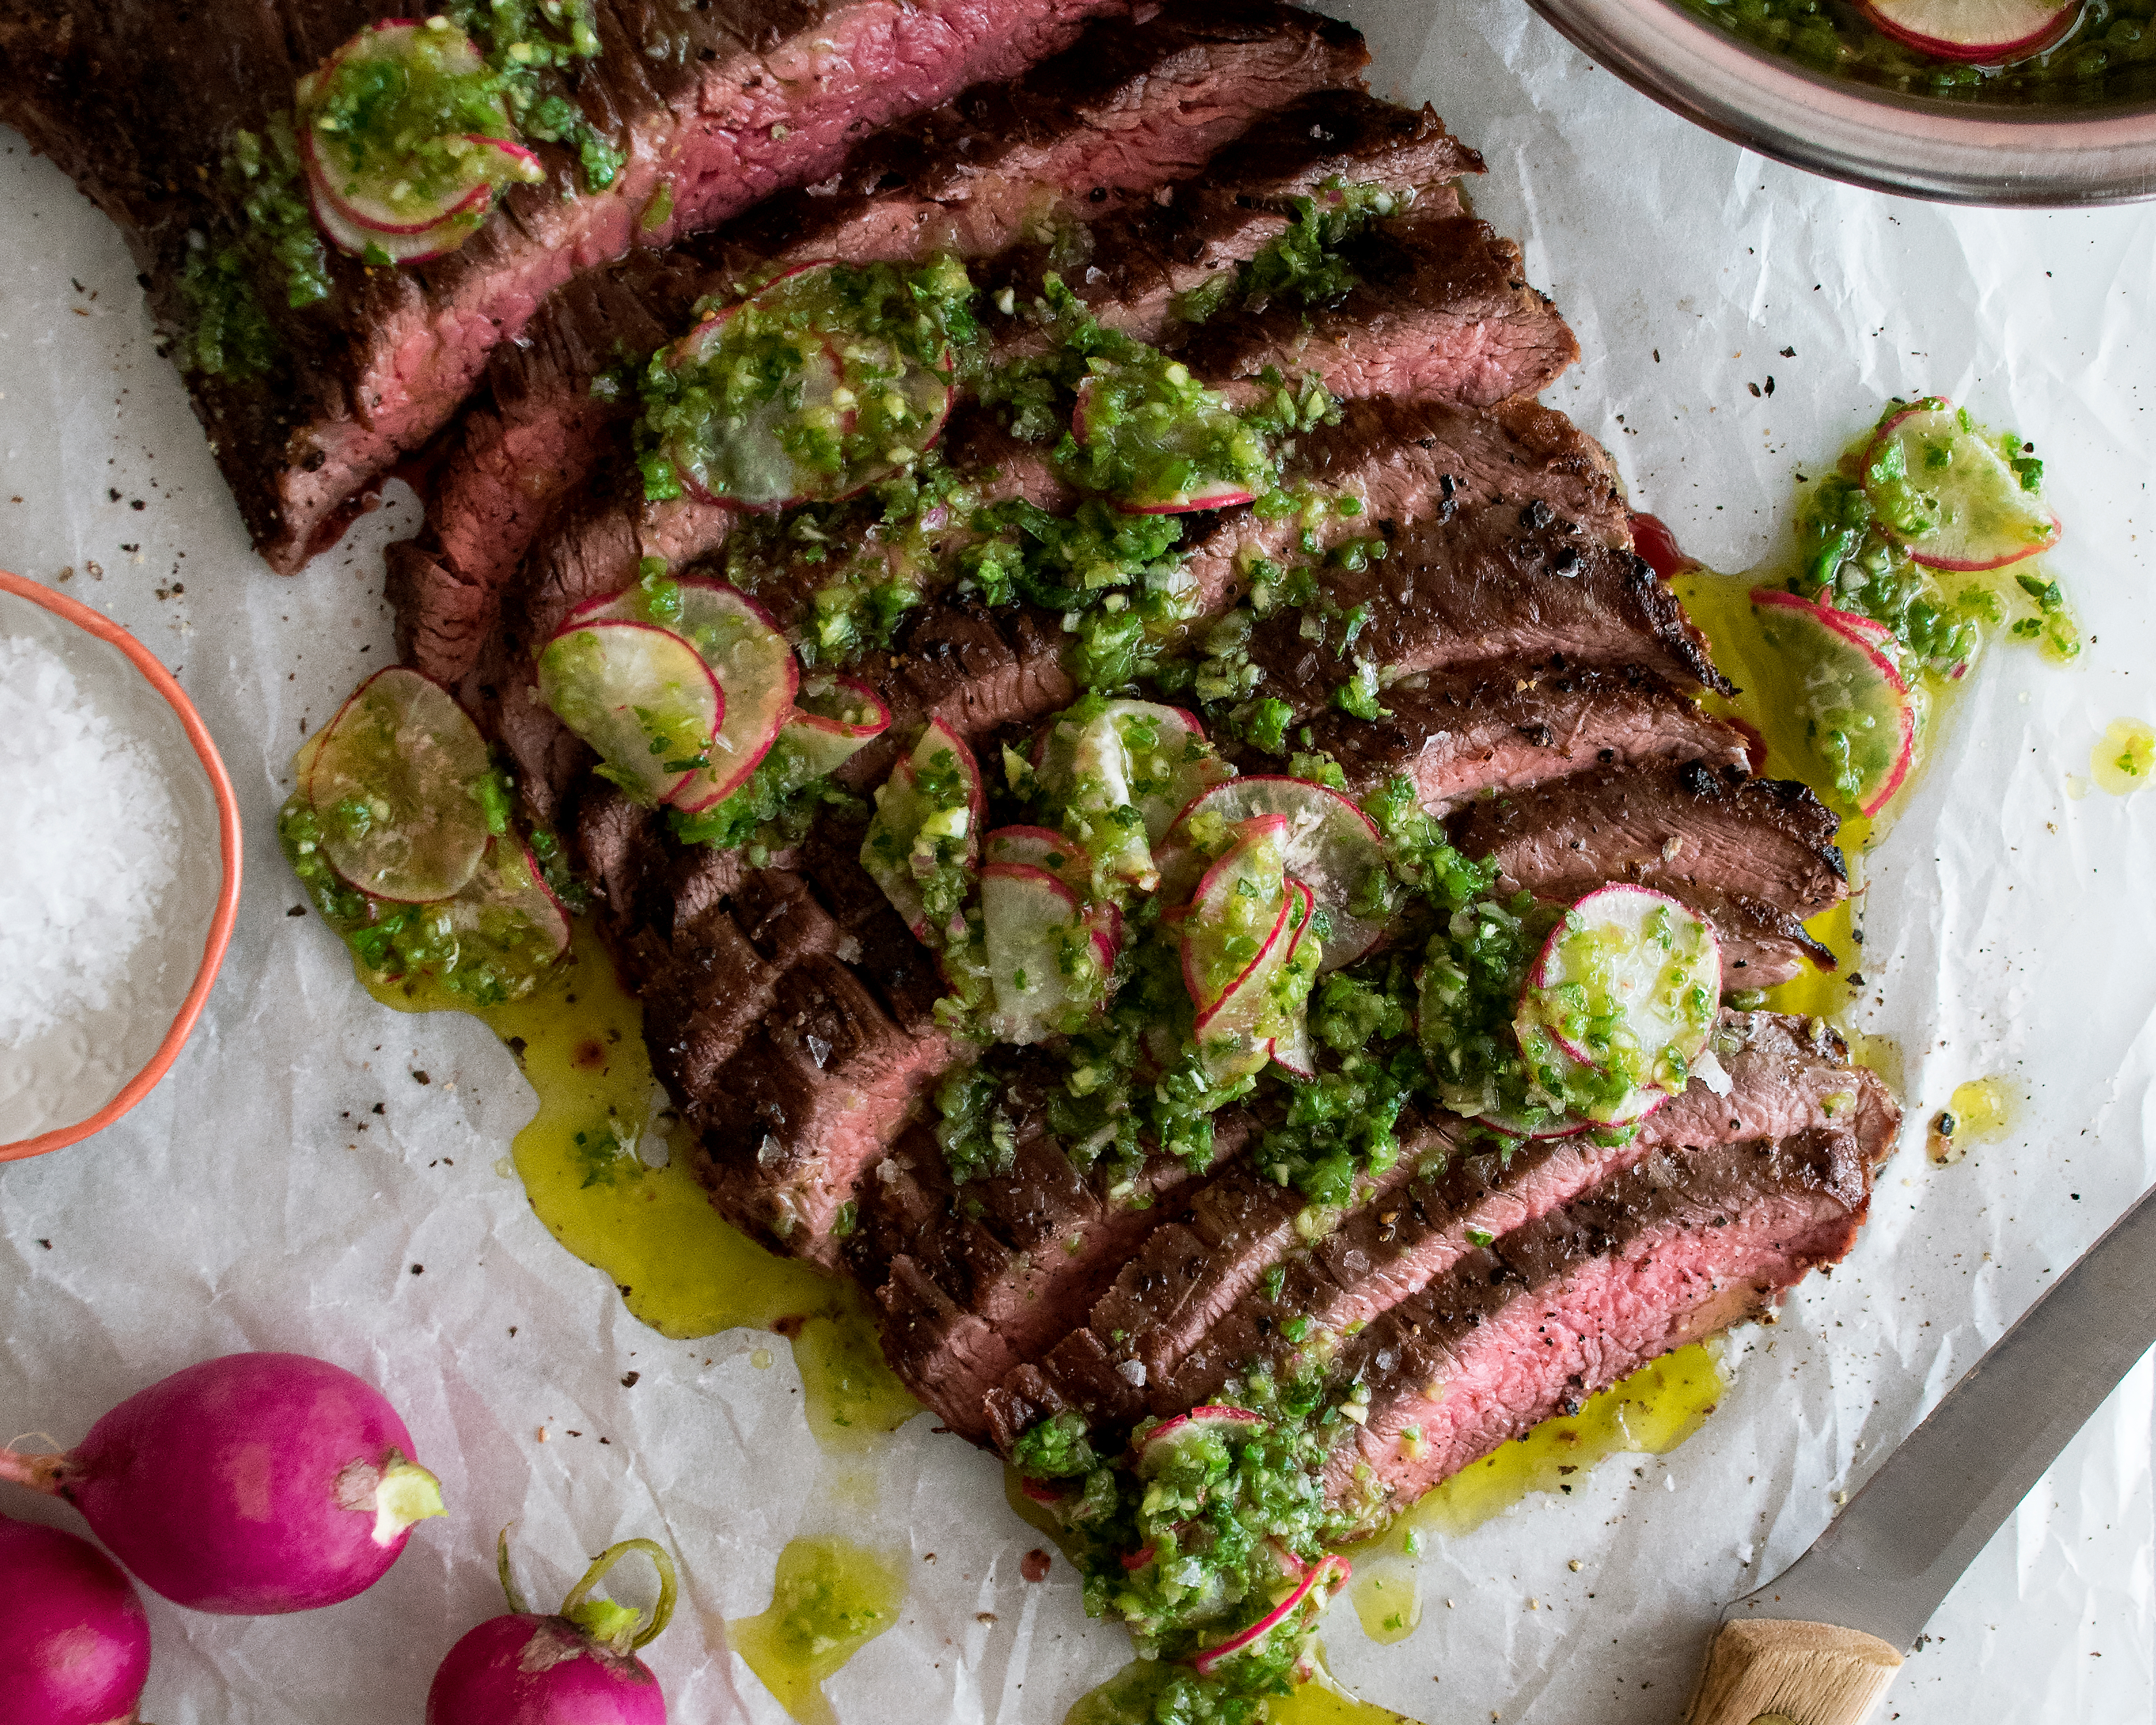 Grilled Flank Steak with Chimichurri Sauce Recipe